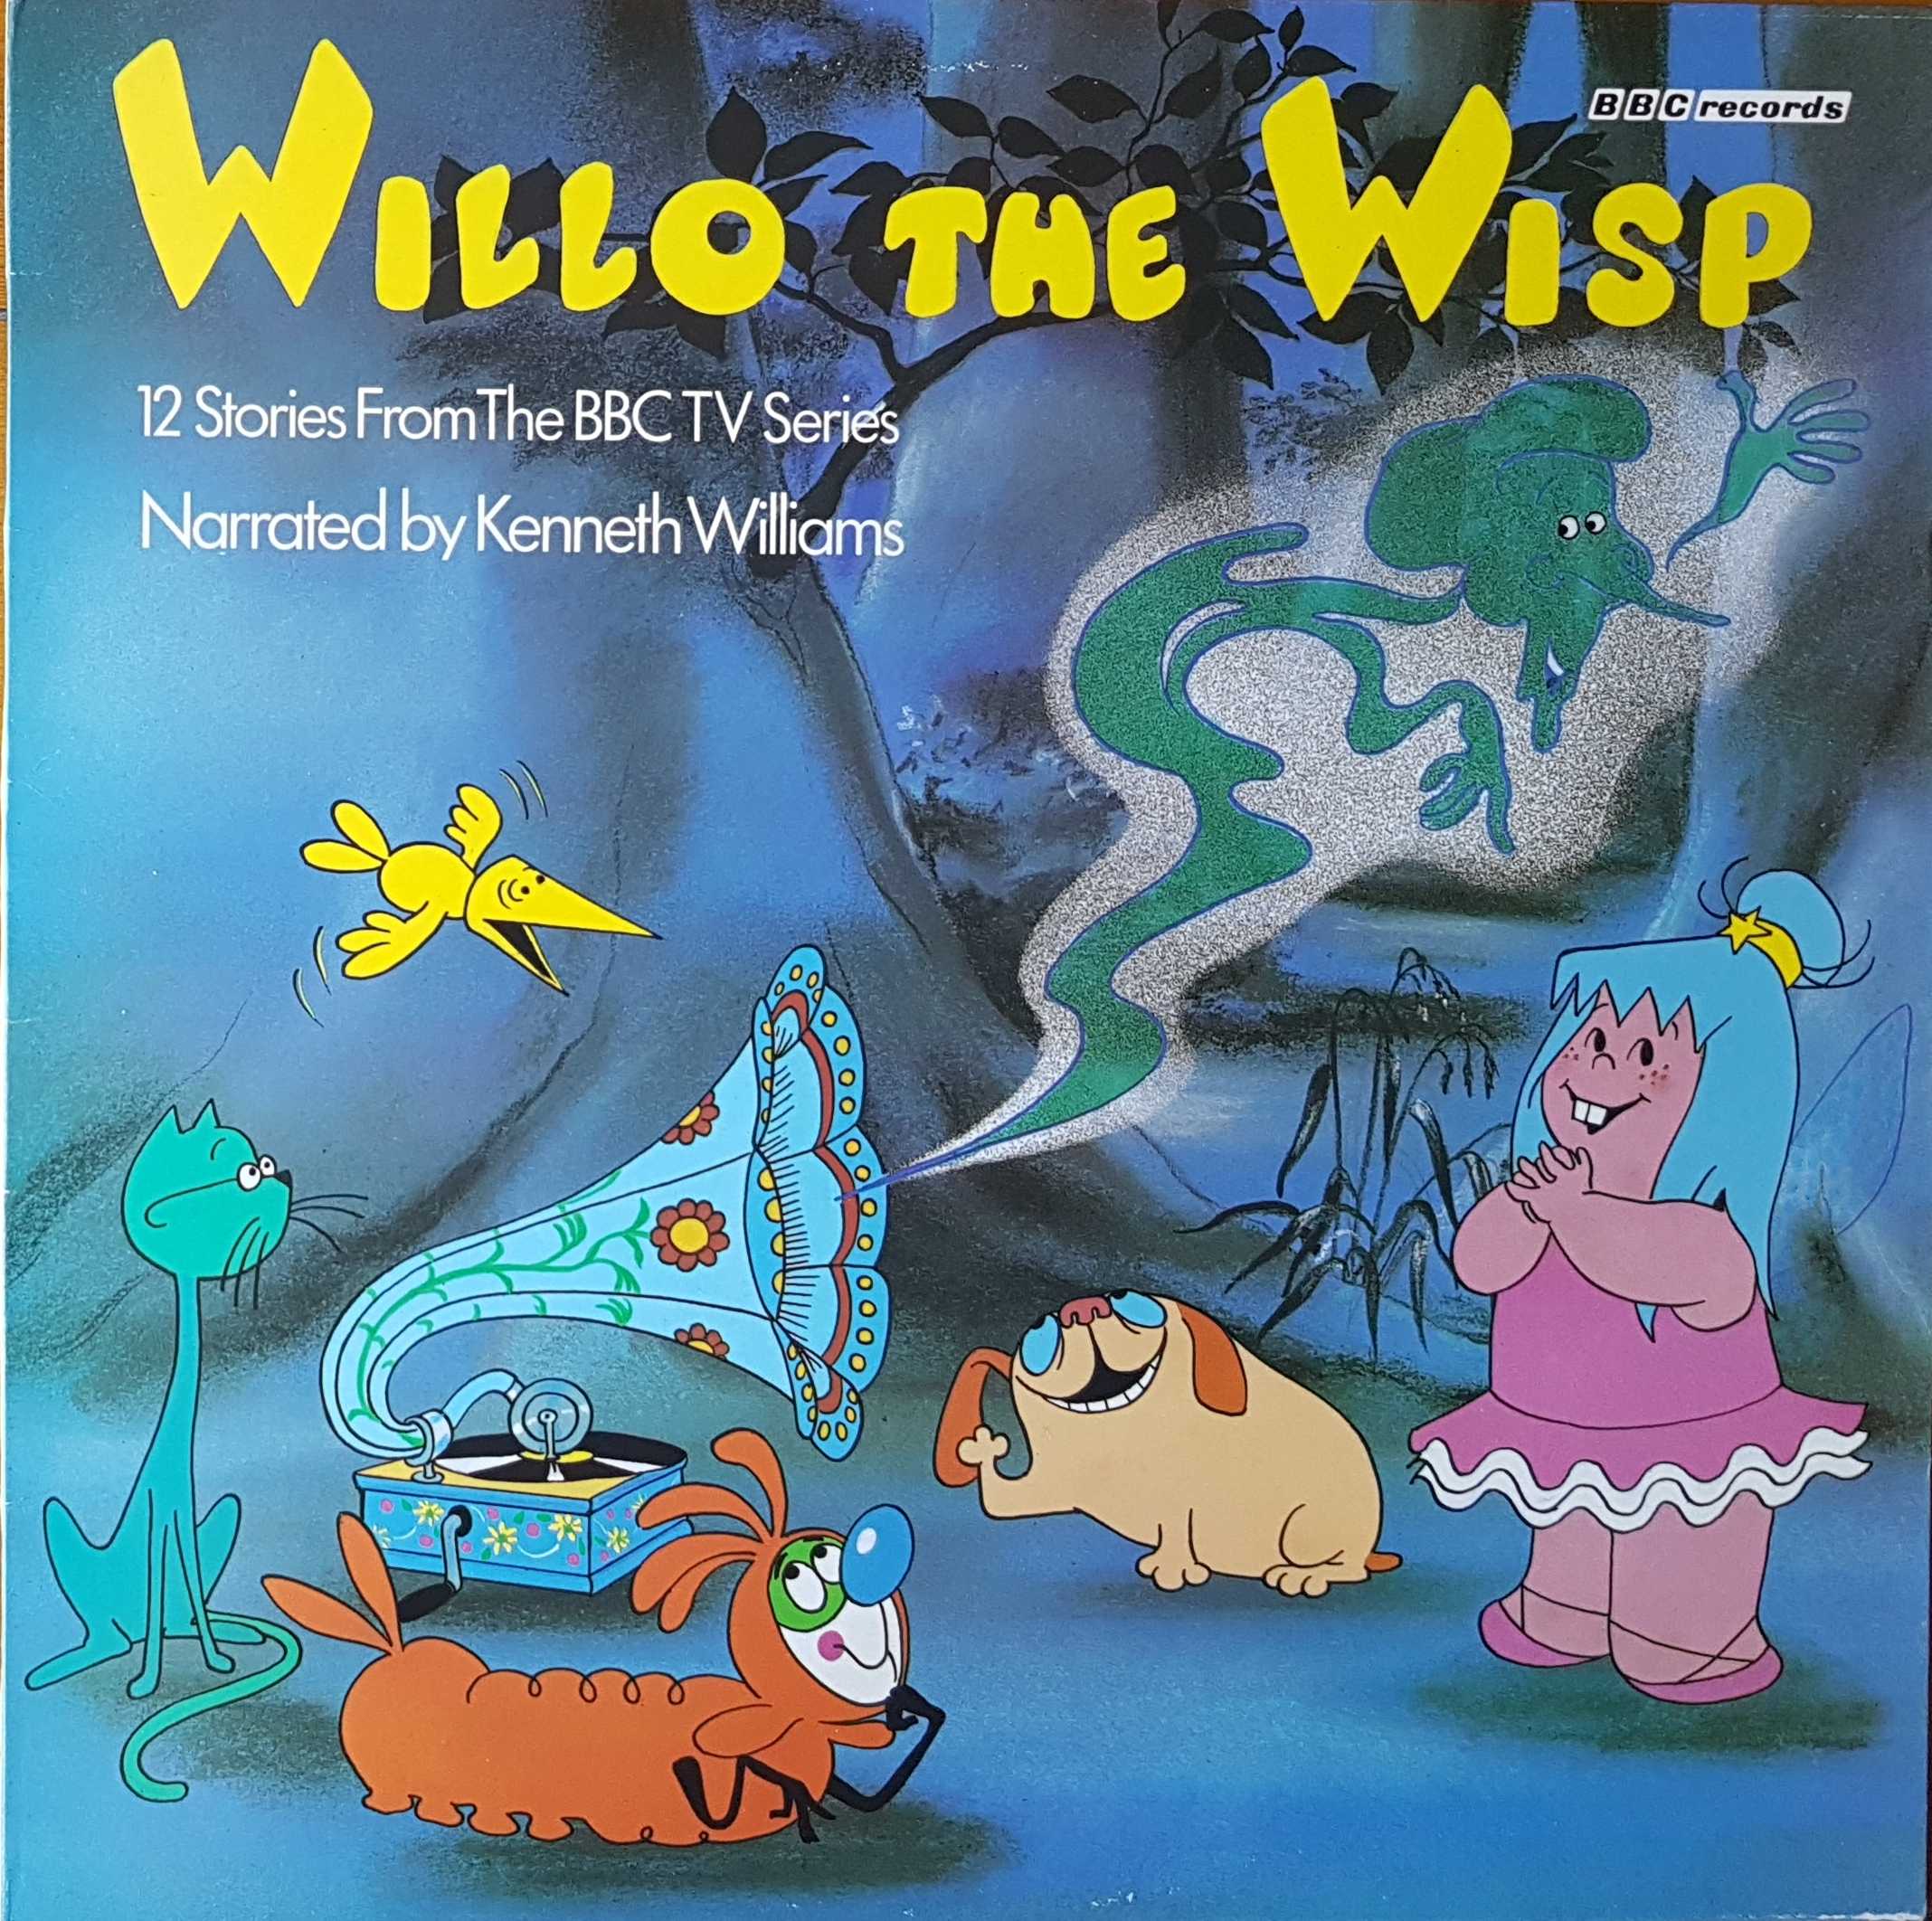 Picture of REC 427 Willo the wisp by artist Nicholas Spargo / Kenneth Williams from the BBC albums - Records and Tapes library